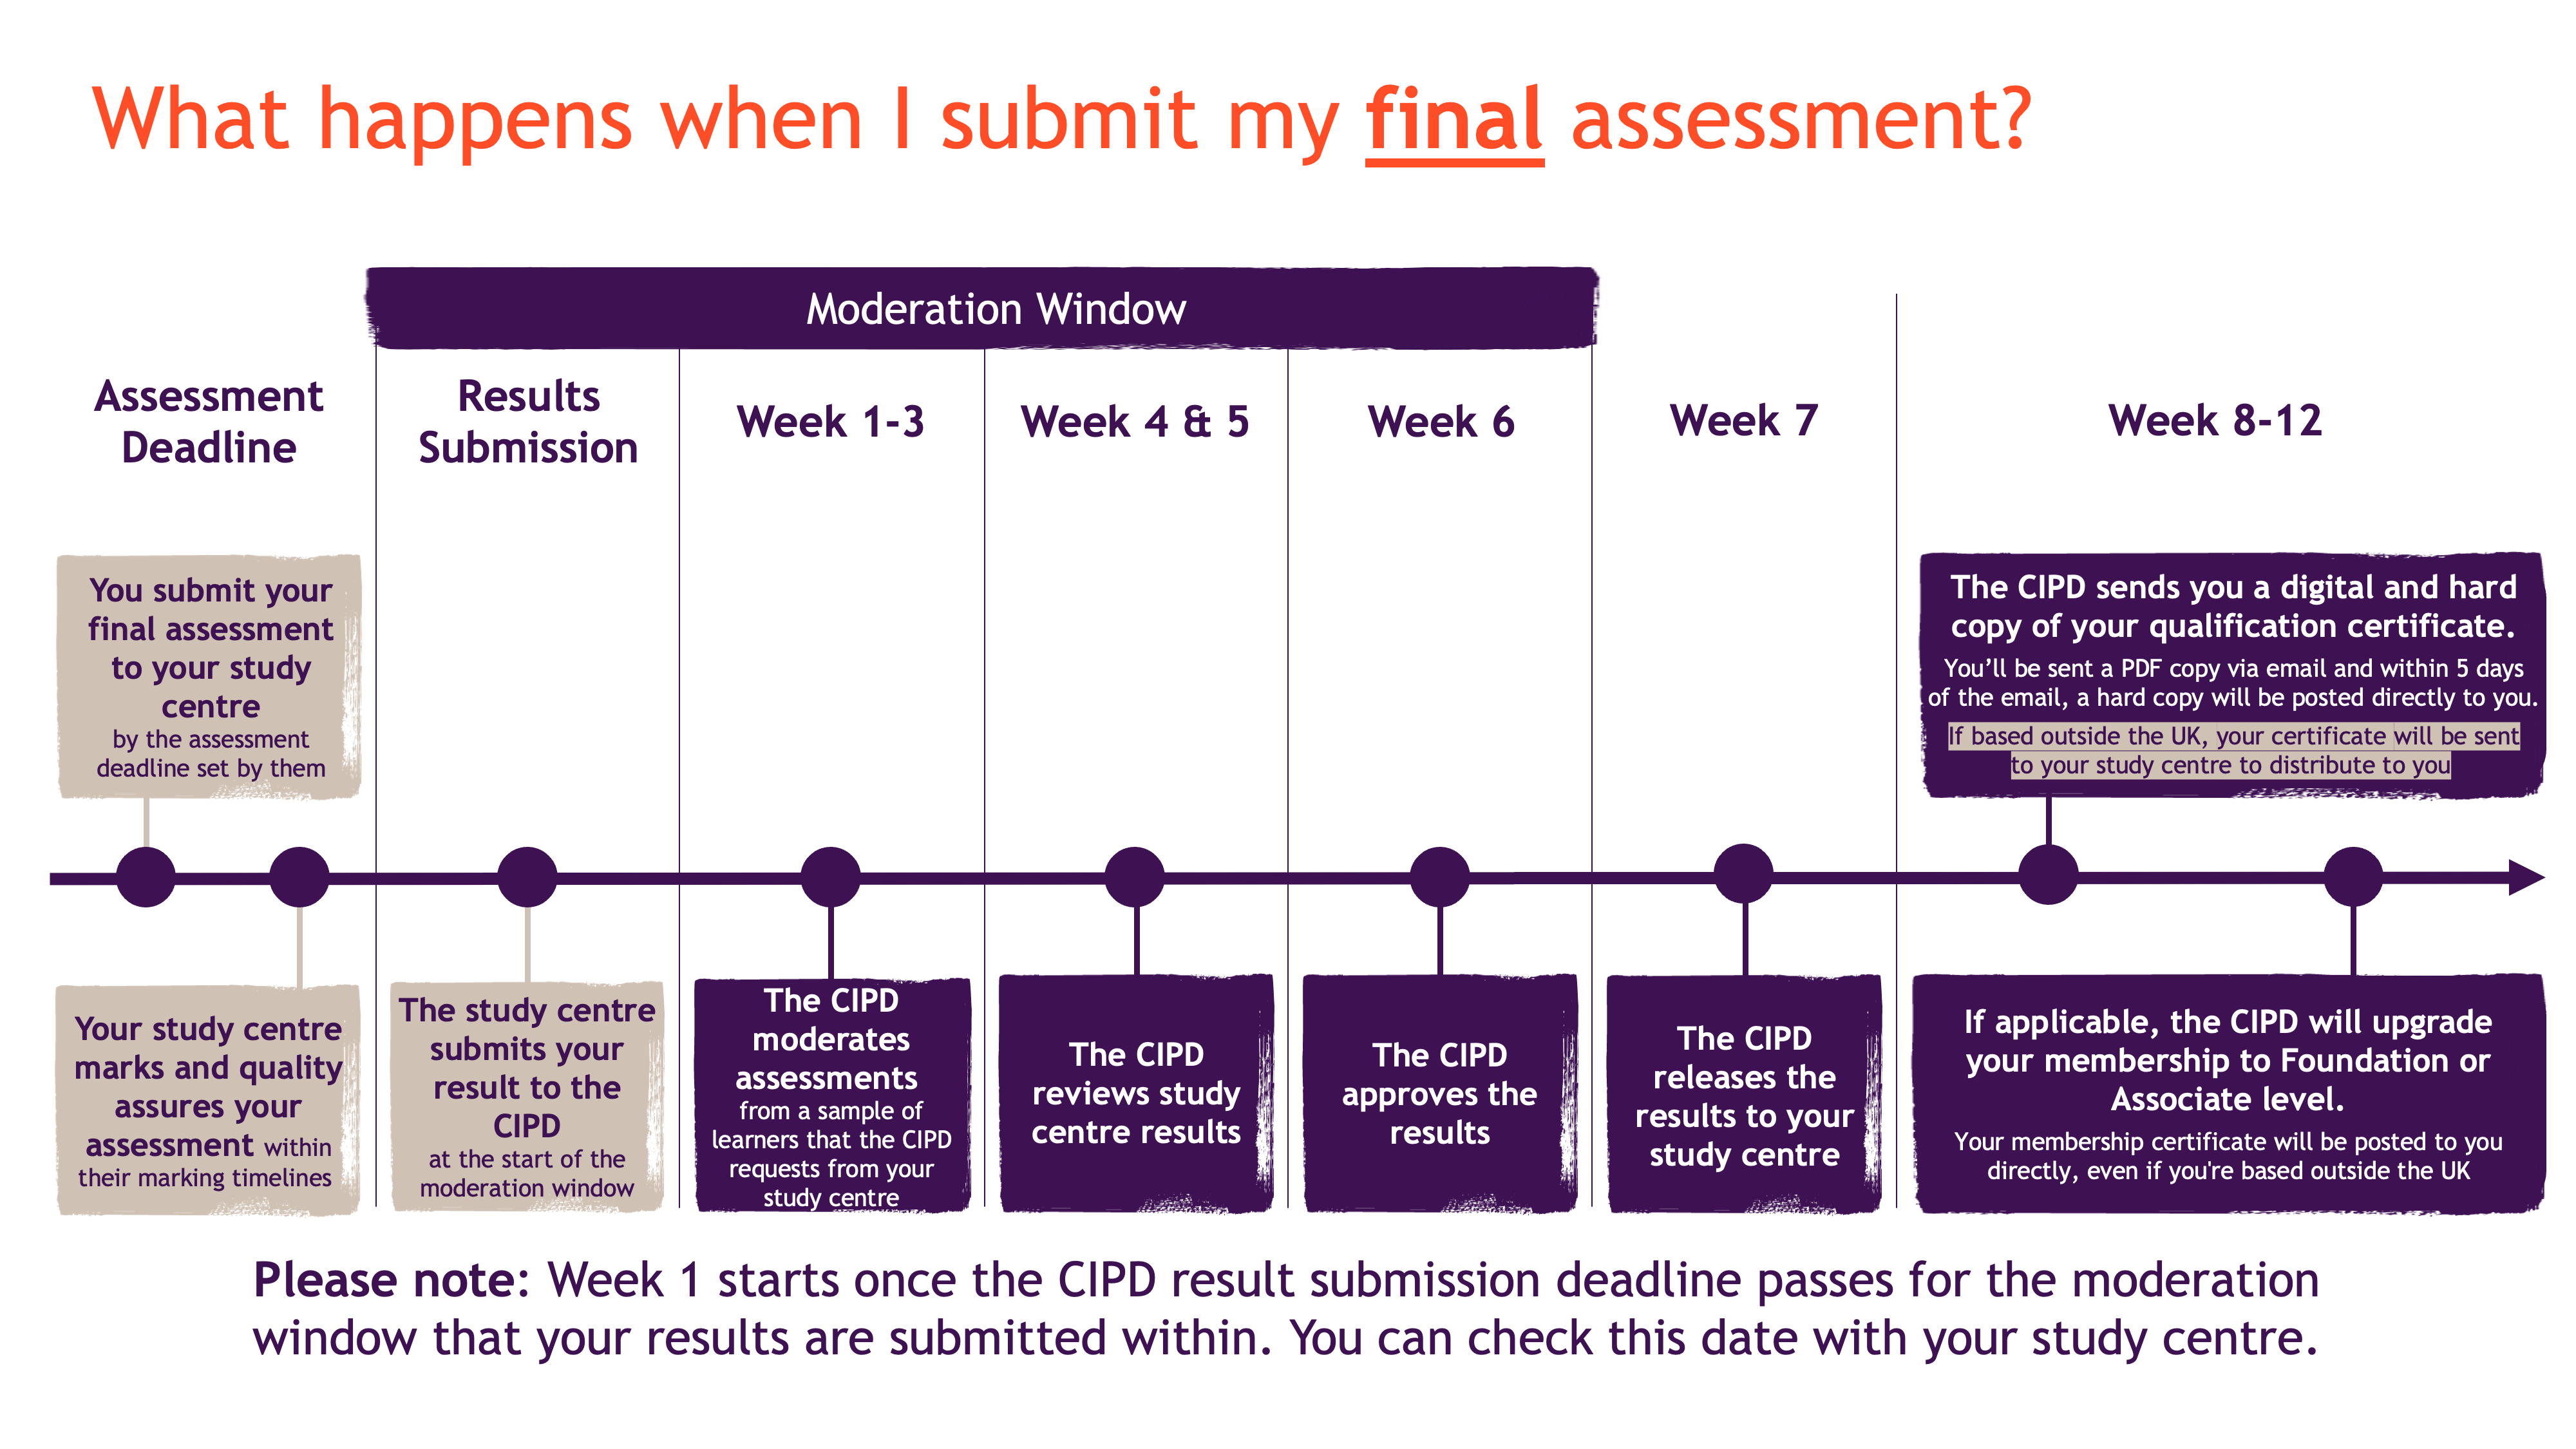 This is a detailed textual representation of the timeline and process involved in receiving a CIPD qualification certificate once you submit your final assessment: 1.	Assessment Deadline stage: You initially submit your final assessment to your study centre by the assessment deadline set by them. Your study centre then marks and quality assures your assessment within their marking timelines. 2.	Results Submission Stage: When the moderation window opens, your study centre will submit your results to the CIPD, before the result submission deadline. 3.	Week 1 to 3: During this period, the CIPD will moderate assessments from a sample of learners that the CIPD requests from your study centre. 4.	Week 4 and 5:  In these weeks, the CIPD reviews study centre results. 5.	Week 6: This week the CIPD approves the results. The moderation window then closes. 6.	Week 7: During this week, the CIPD releases the results to your study centre. 7.	Week 8 to 12: Within this timeframe, you will receive a PDF of your CIPD qualification certificate via email. Within 5 days of the email notification, a hard copy will be posted to you directly. If based outside the UK, your certificate will be sent to your study centre to distribute to you. Then, if applicable, the CIPD will upgrade your membership to Foundation or Associate level. Your membership certificate will be posted to you directly, even if you are based outside the UK. Note: Week 1 starts once the CIPD result submission deadline passes, for the moderation window that your results are submitted within. You can check this date with your study centre. 